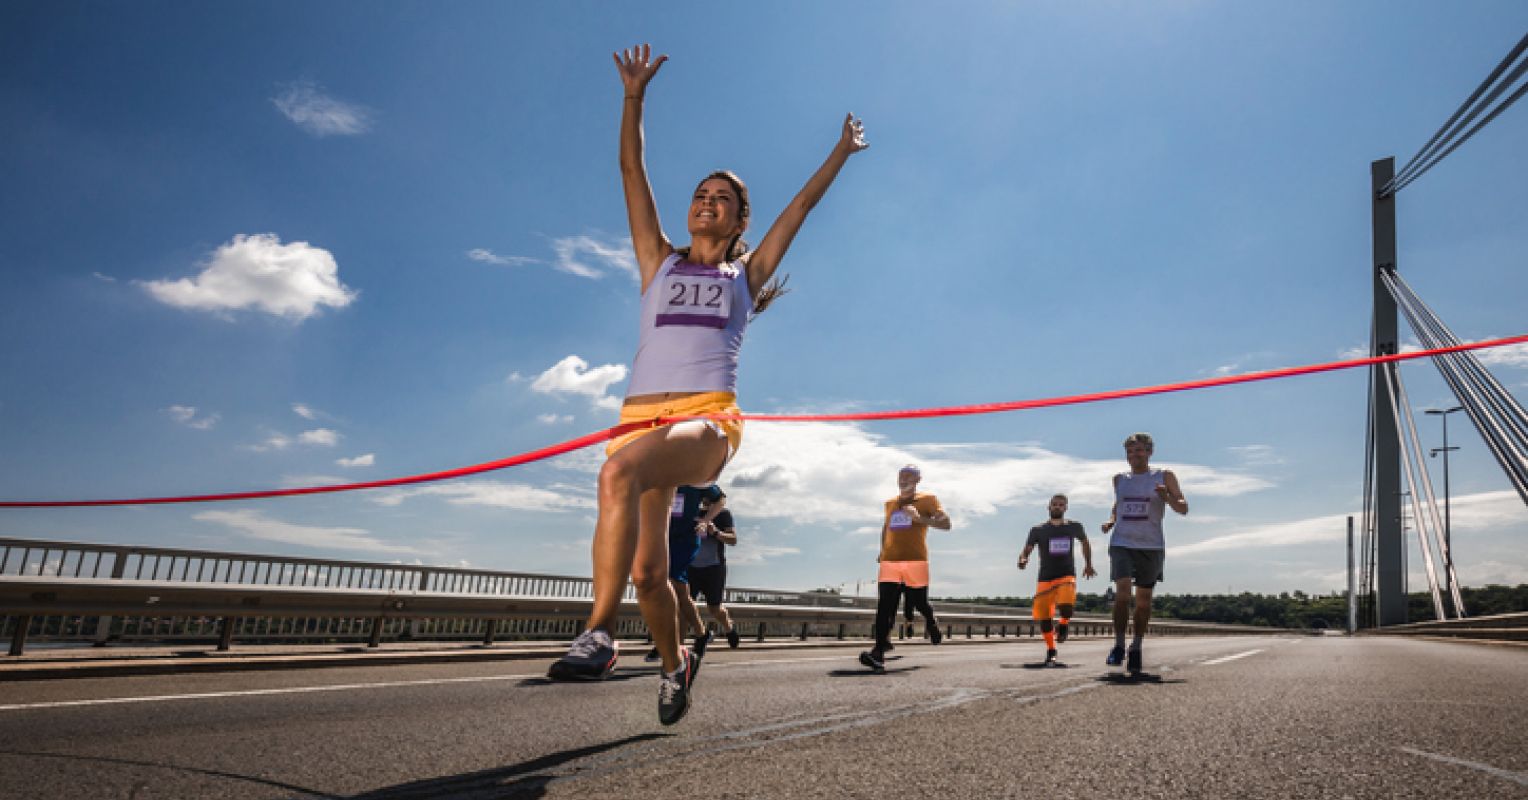 How to Cross the Finish Line  Psychology Today United Kingdom